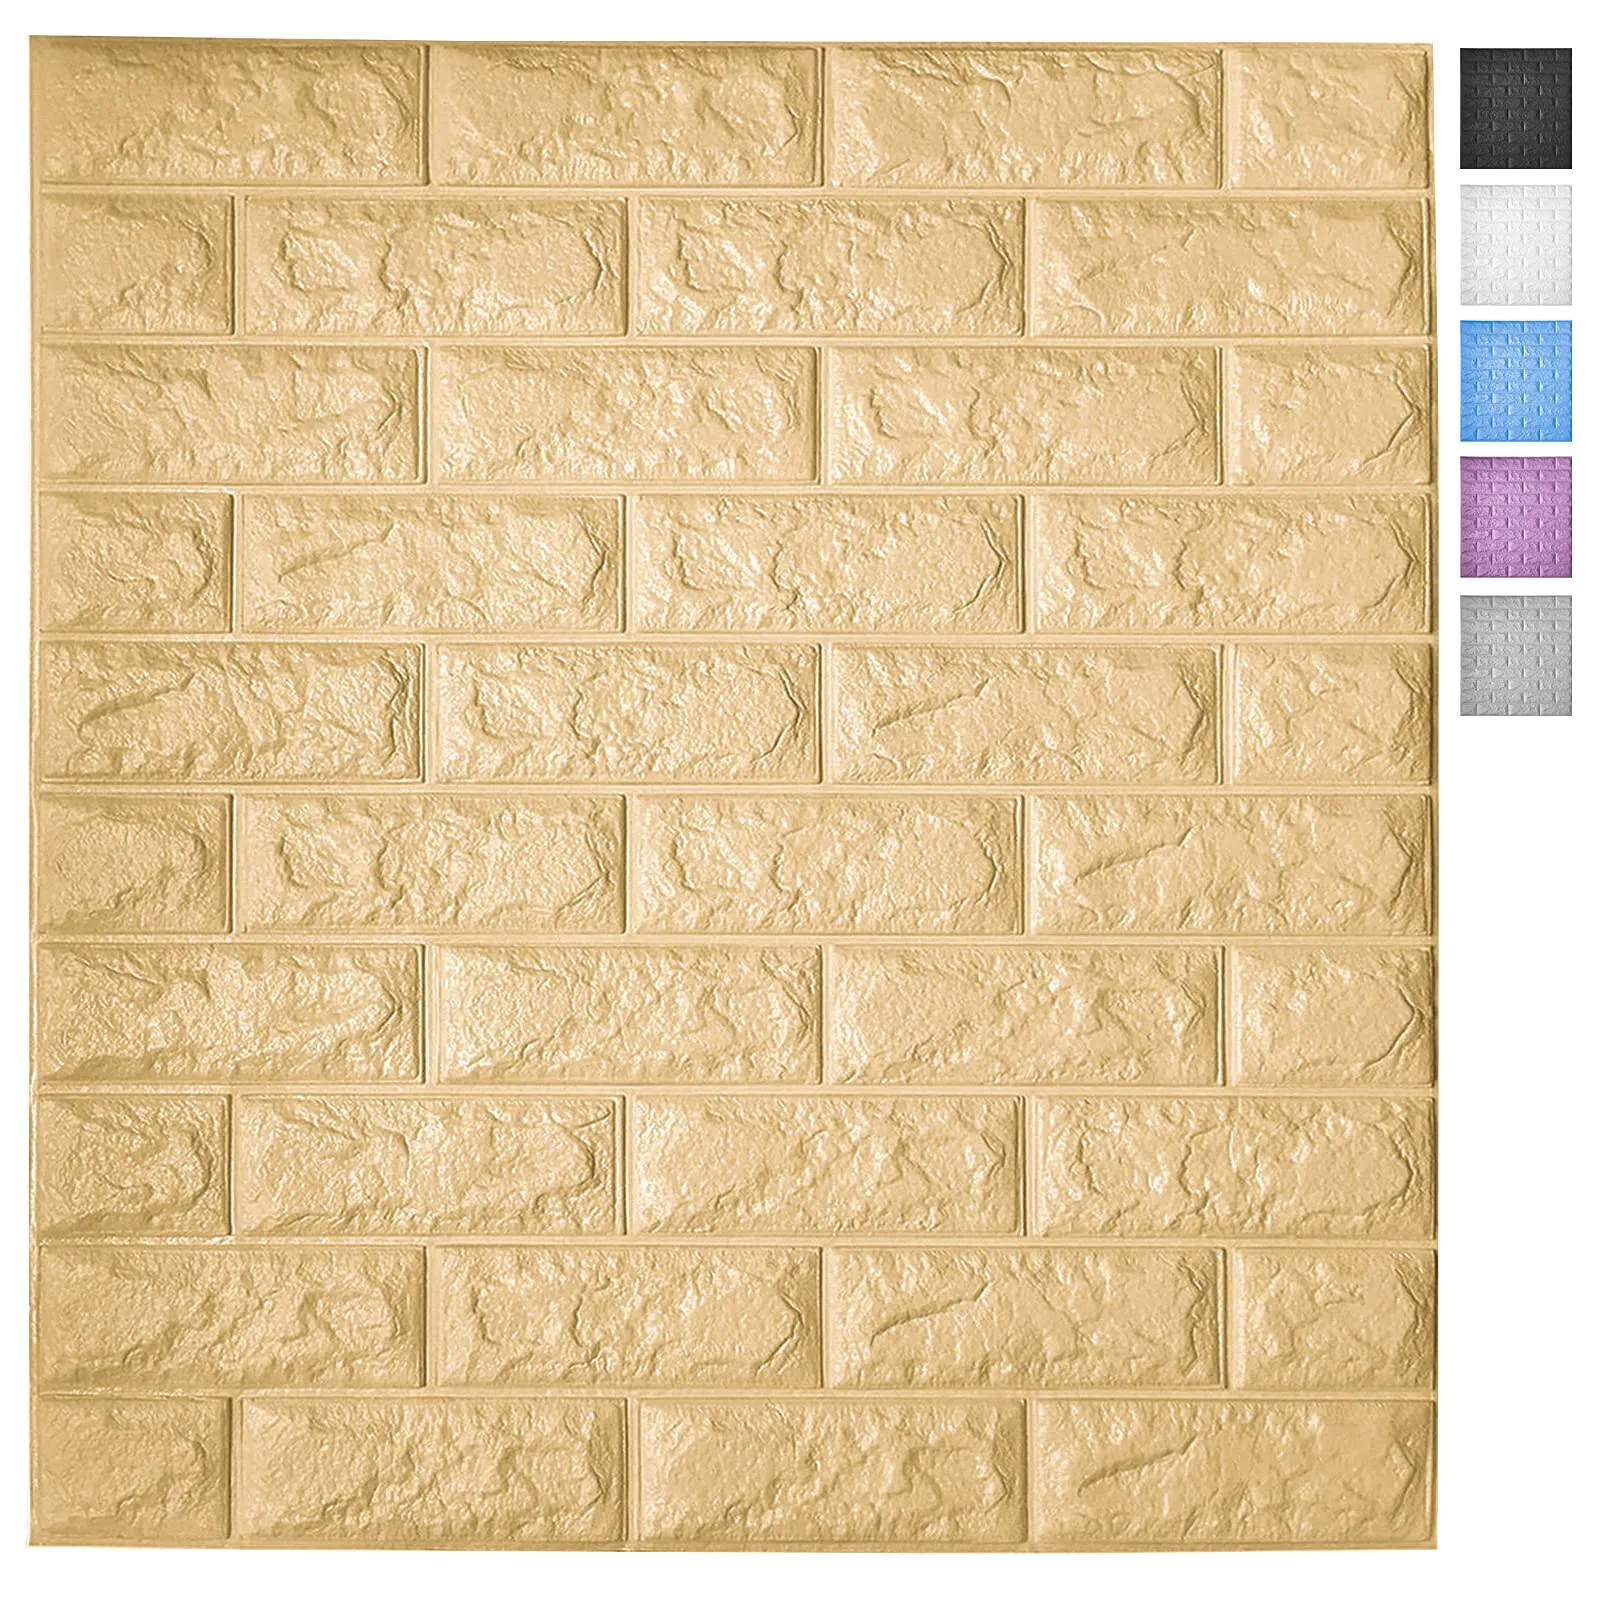 Art3d 5 Pack Peel And Stick 3D Wallpaper Panels For Interior Wall Decor  Self Adhesive Foam Brick Depressed Wallpapers In Yellow, Covers 29 Sq.Ft  From Art3dusa, $27.68